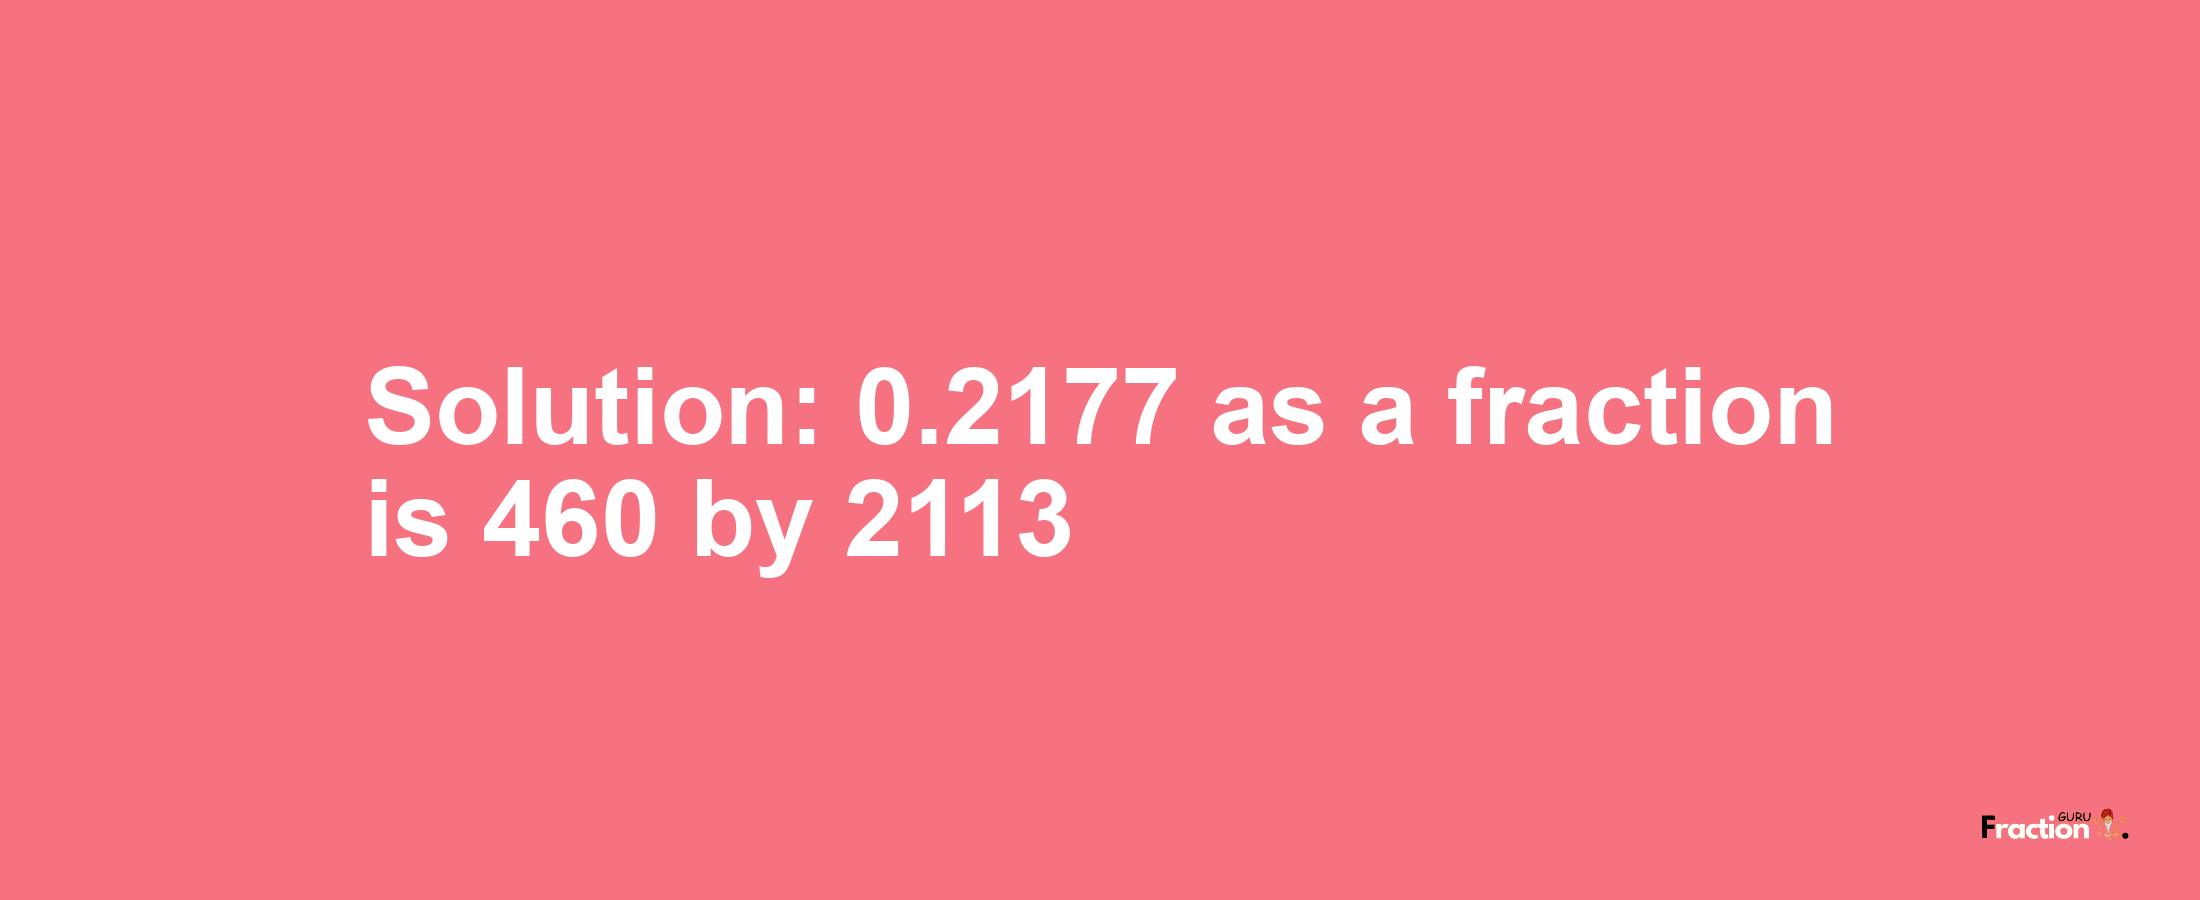 Solution:0.2177 as a fraction is 460/2113